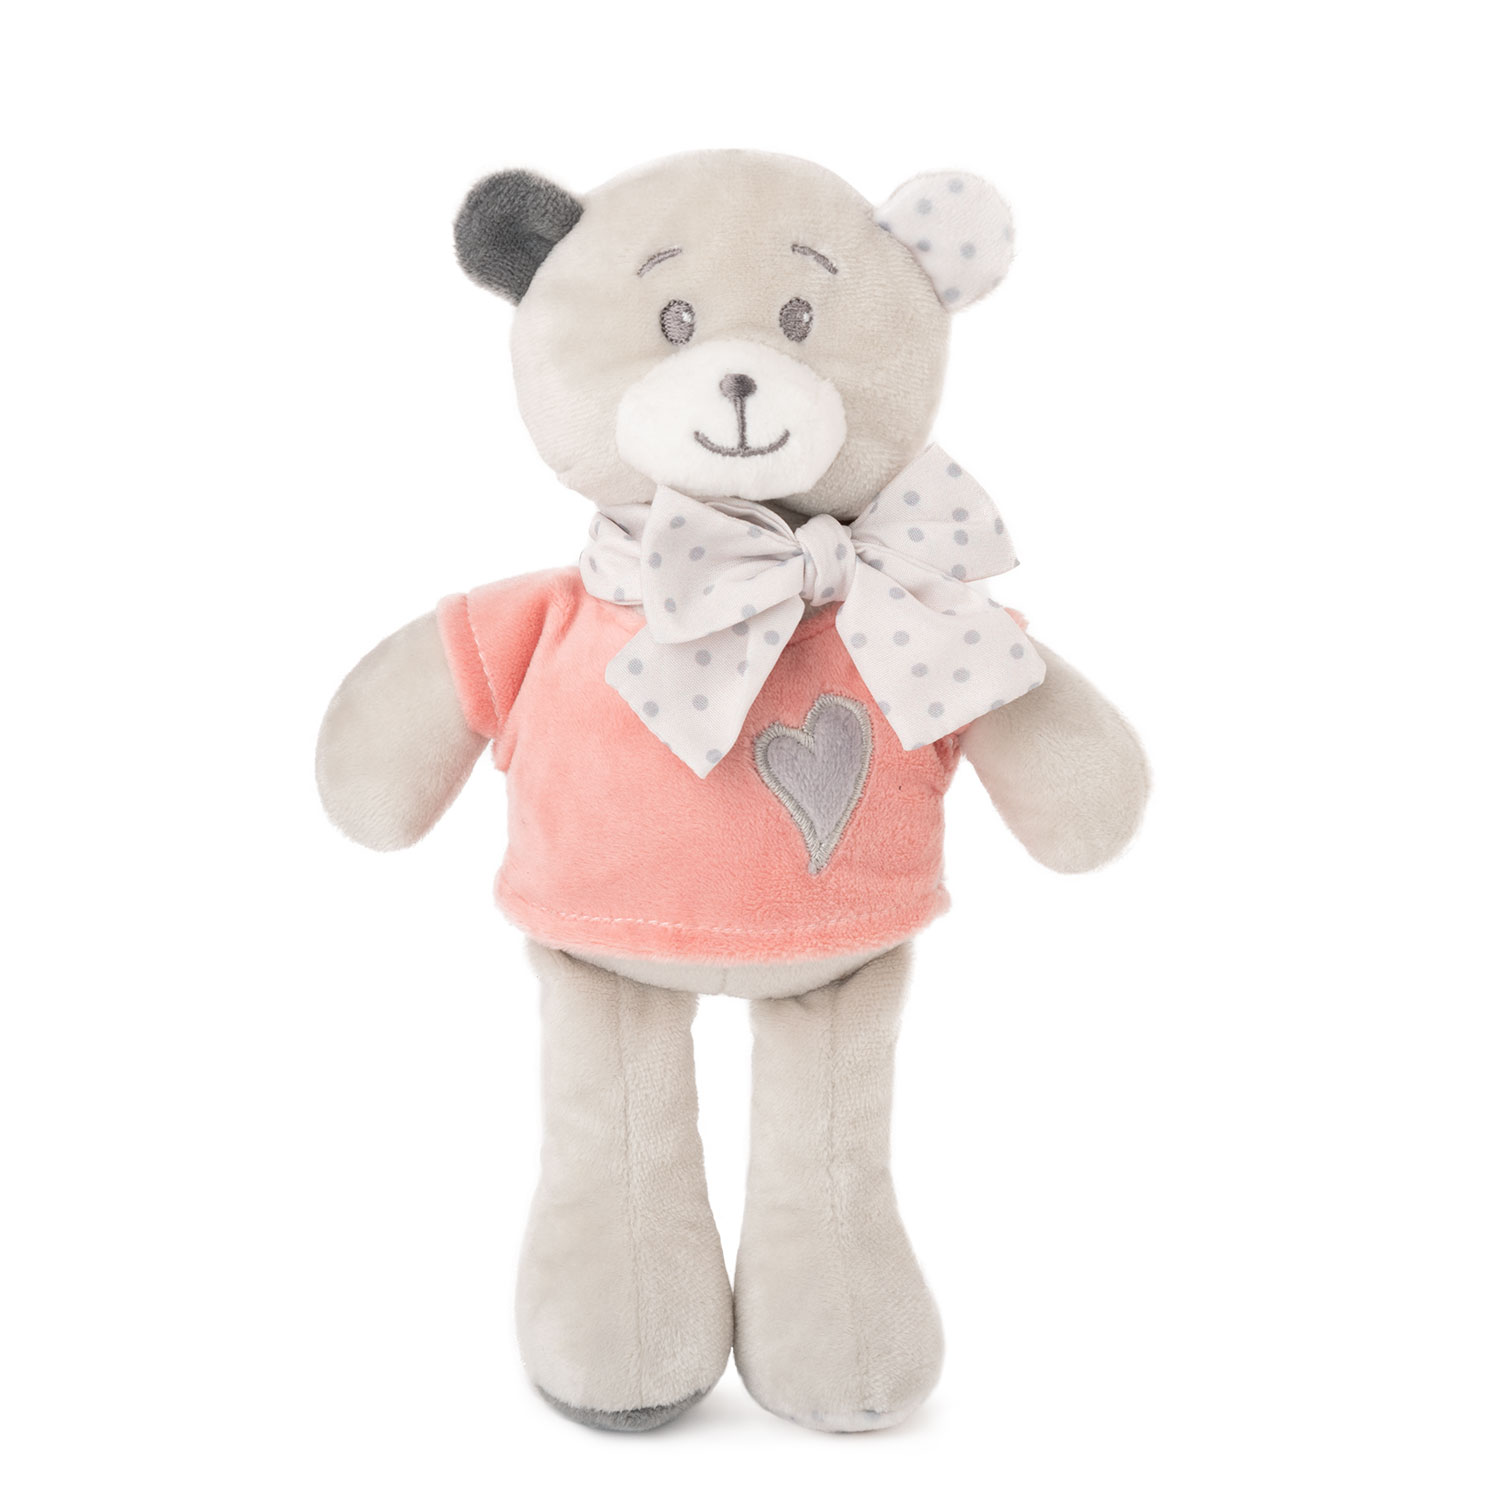 Baby toy bear - Pink